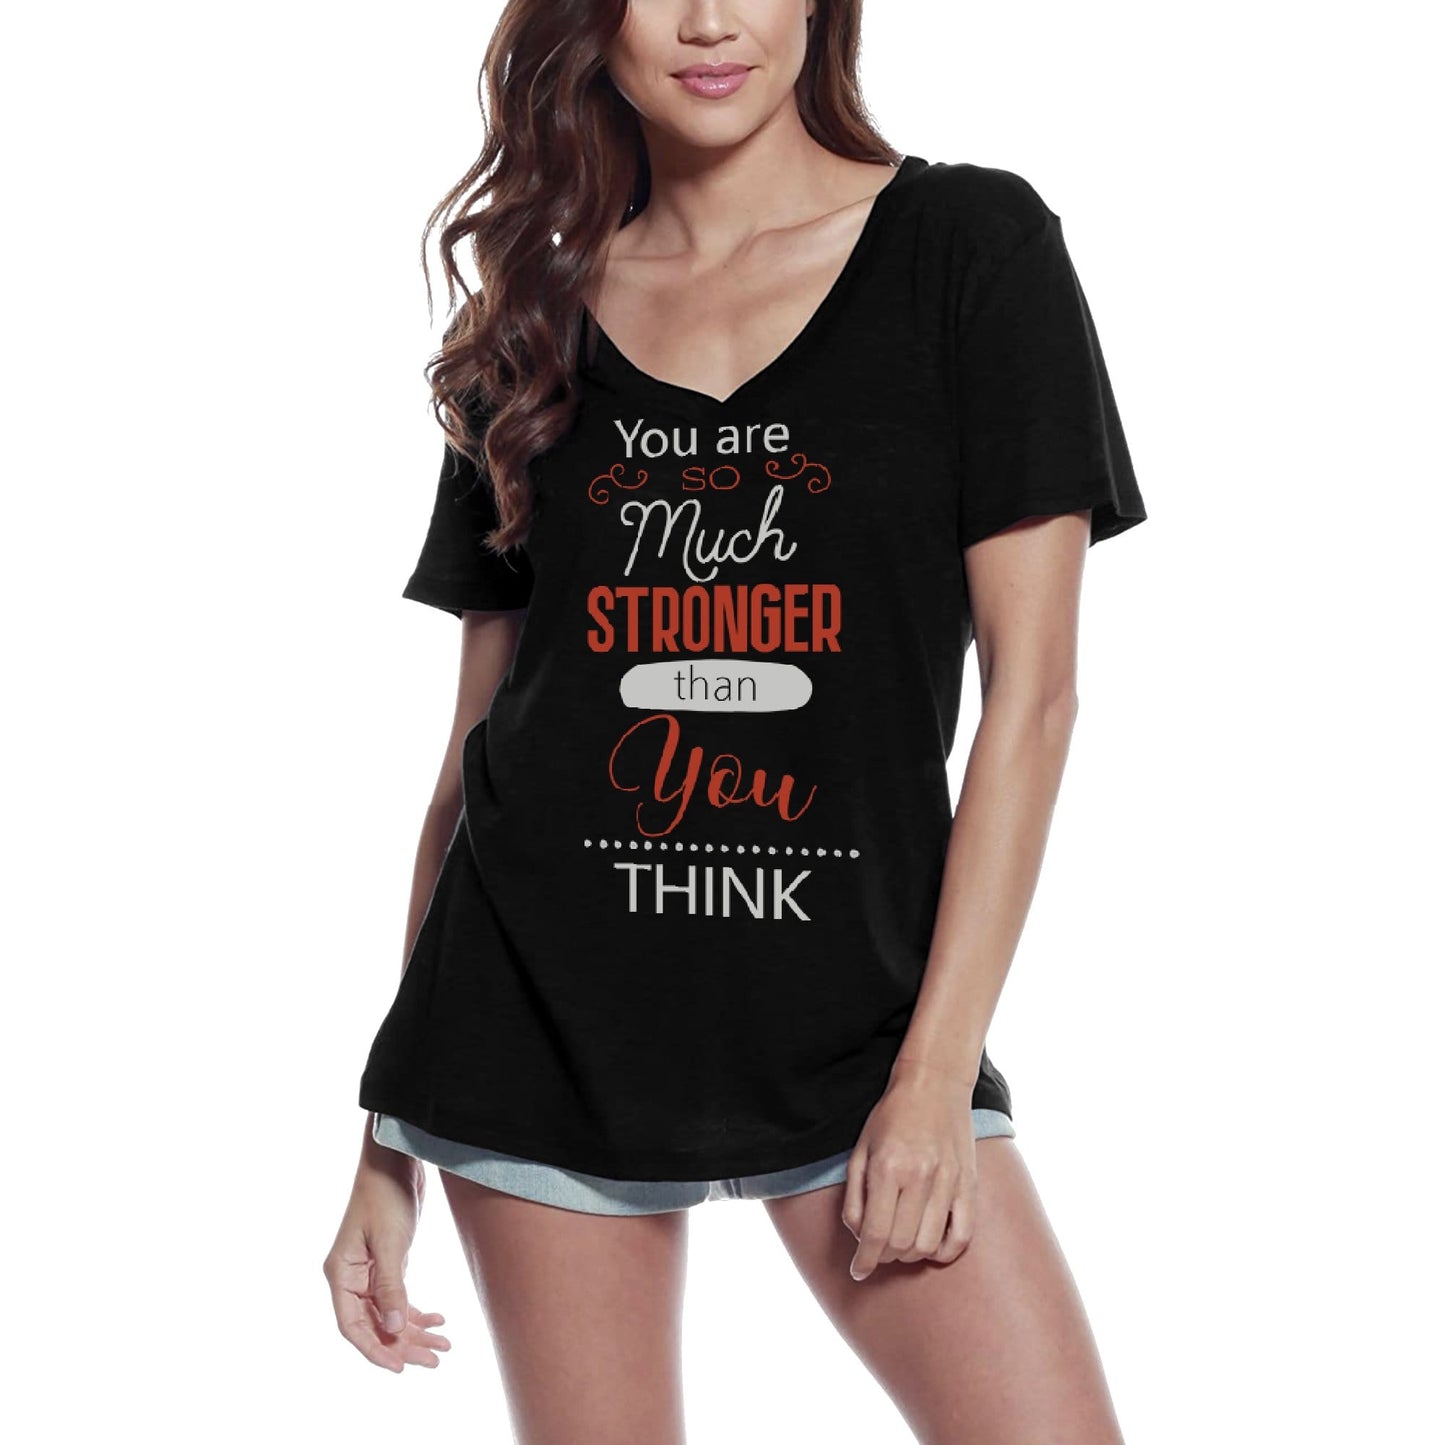 ULTRABASIC Women's V Neck T-Shirt You Are So Much Stronger Than You Think - Motivational Quote